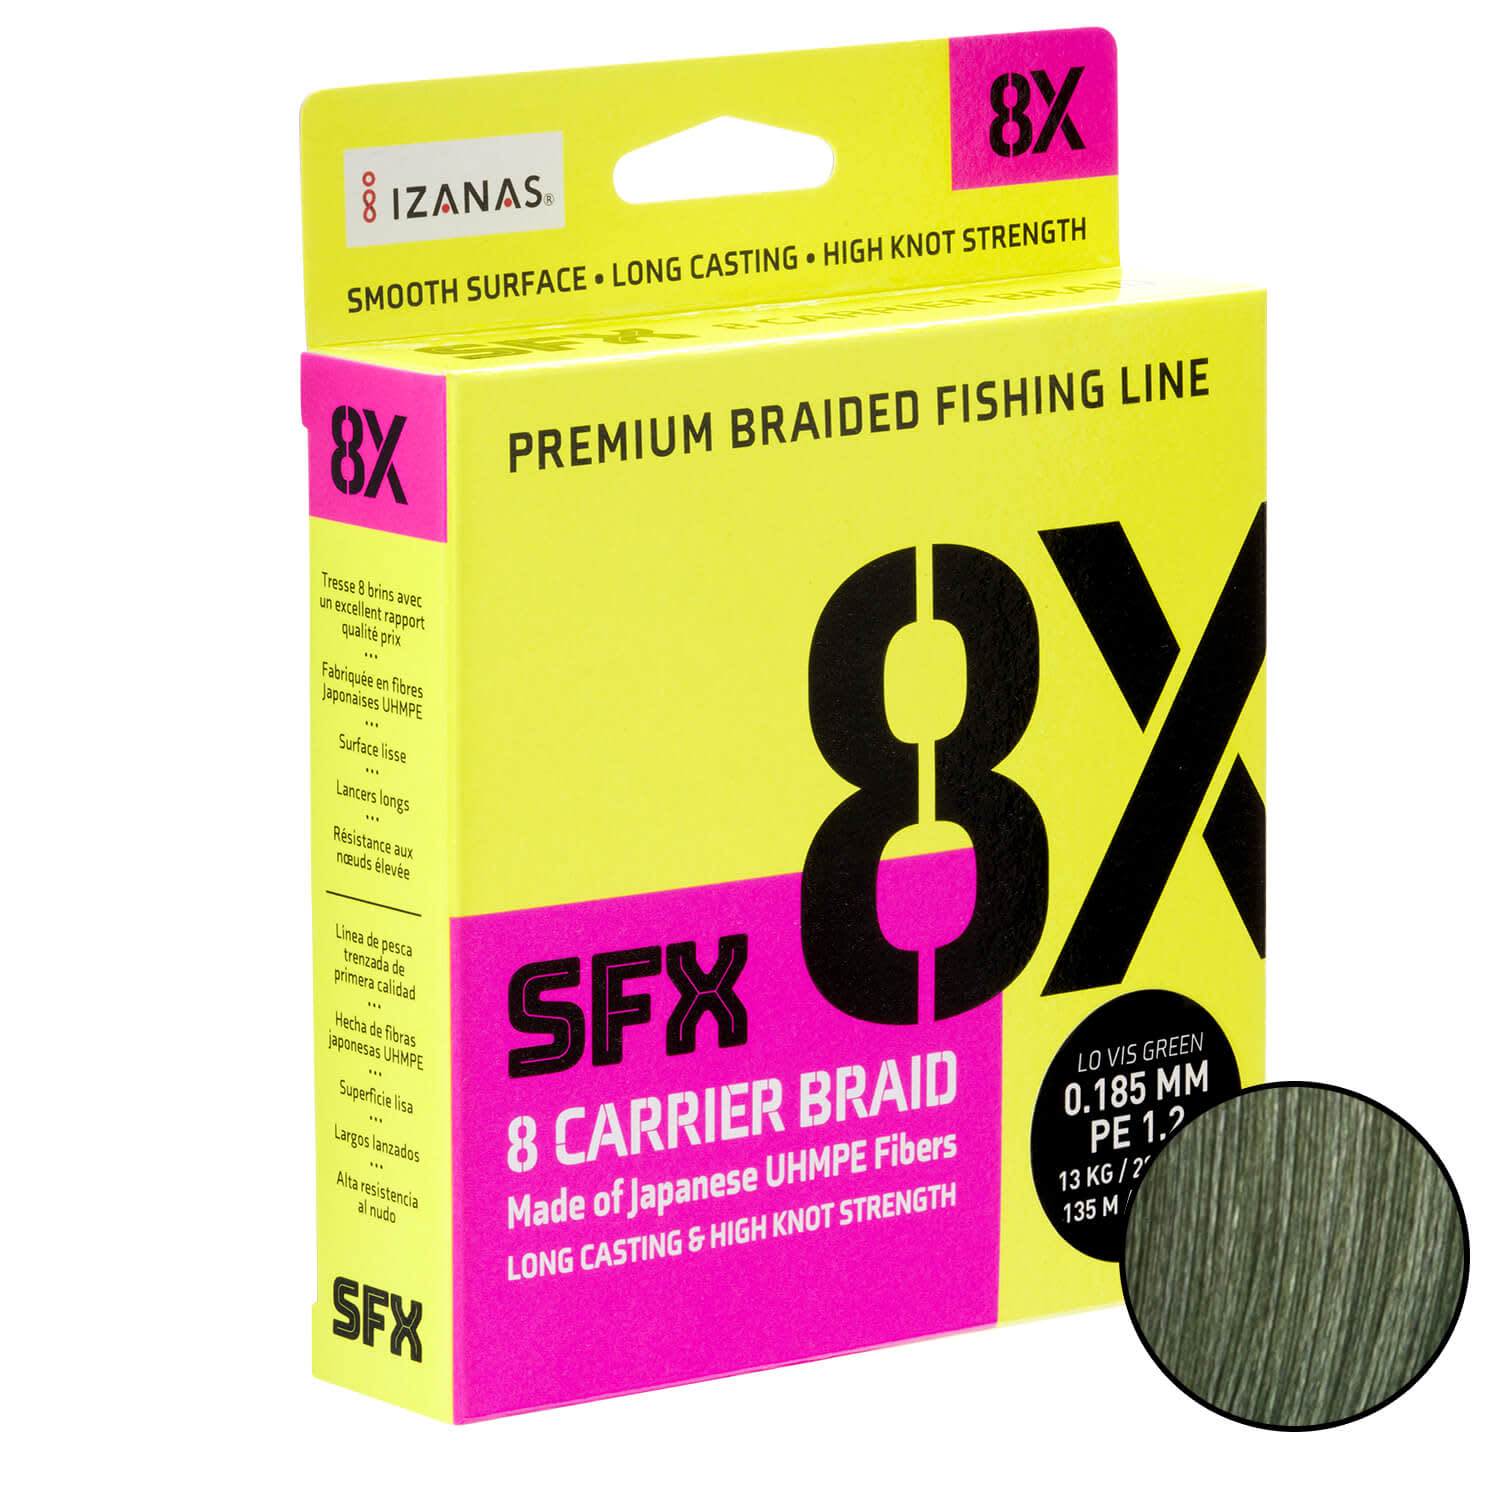 Sufix SFX 8X Carrier Braided Fishing Line 135m Lo-Vis Green